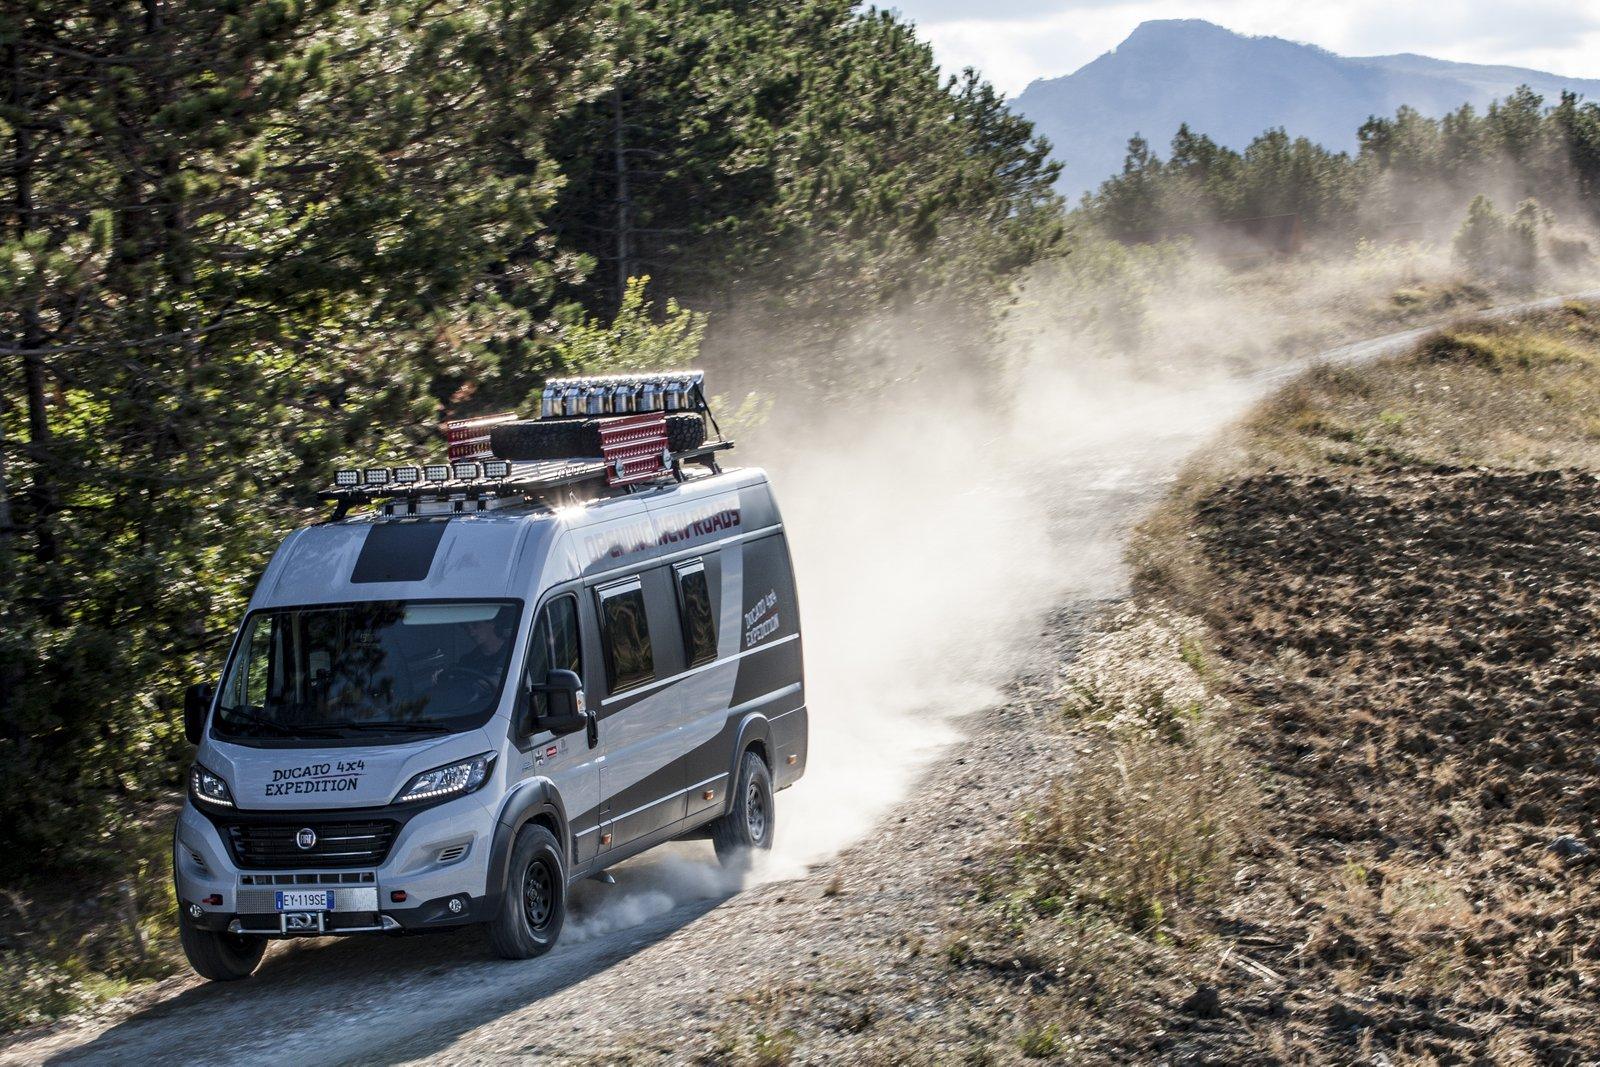 ducato 4x4 expedition for sale